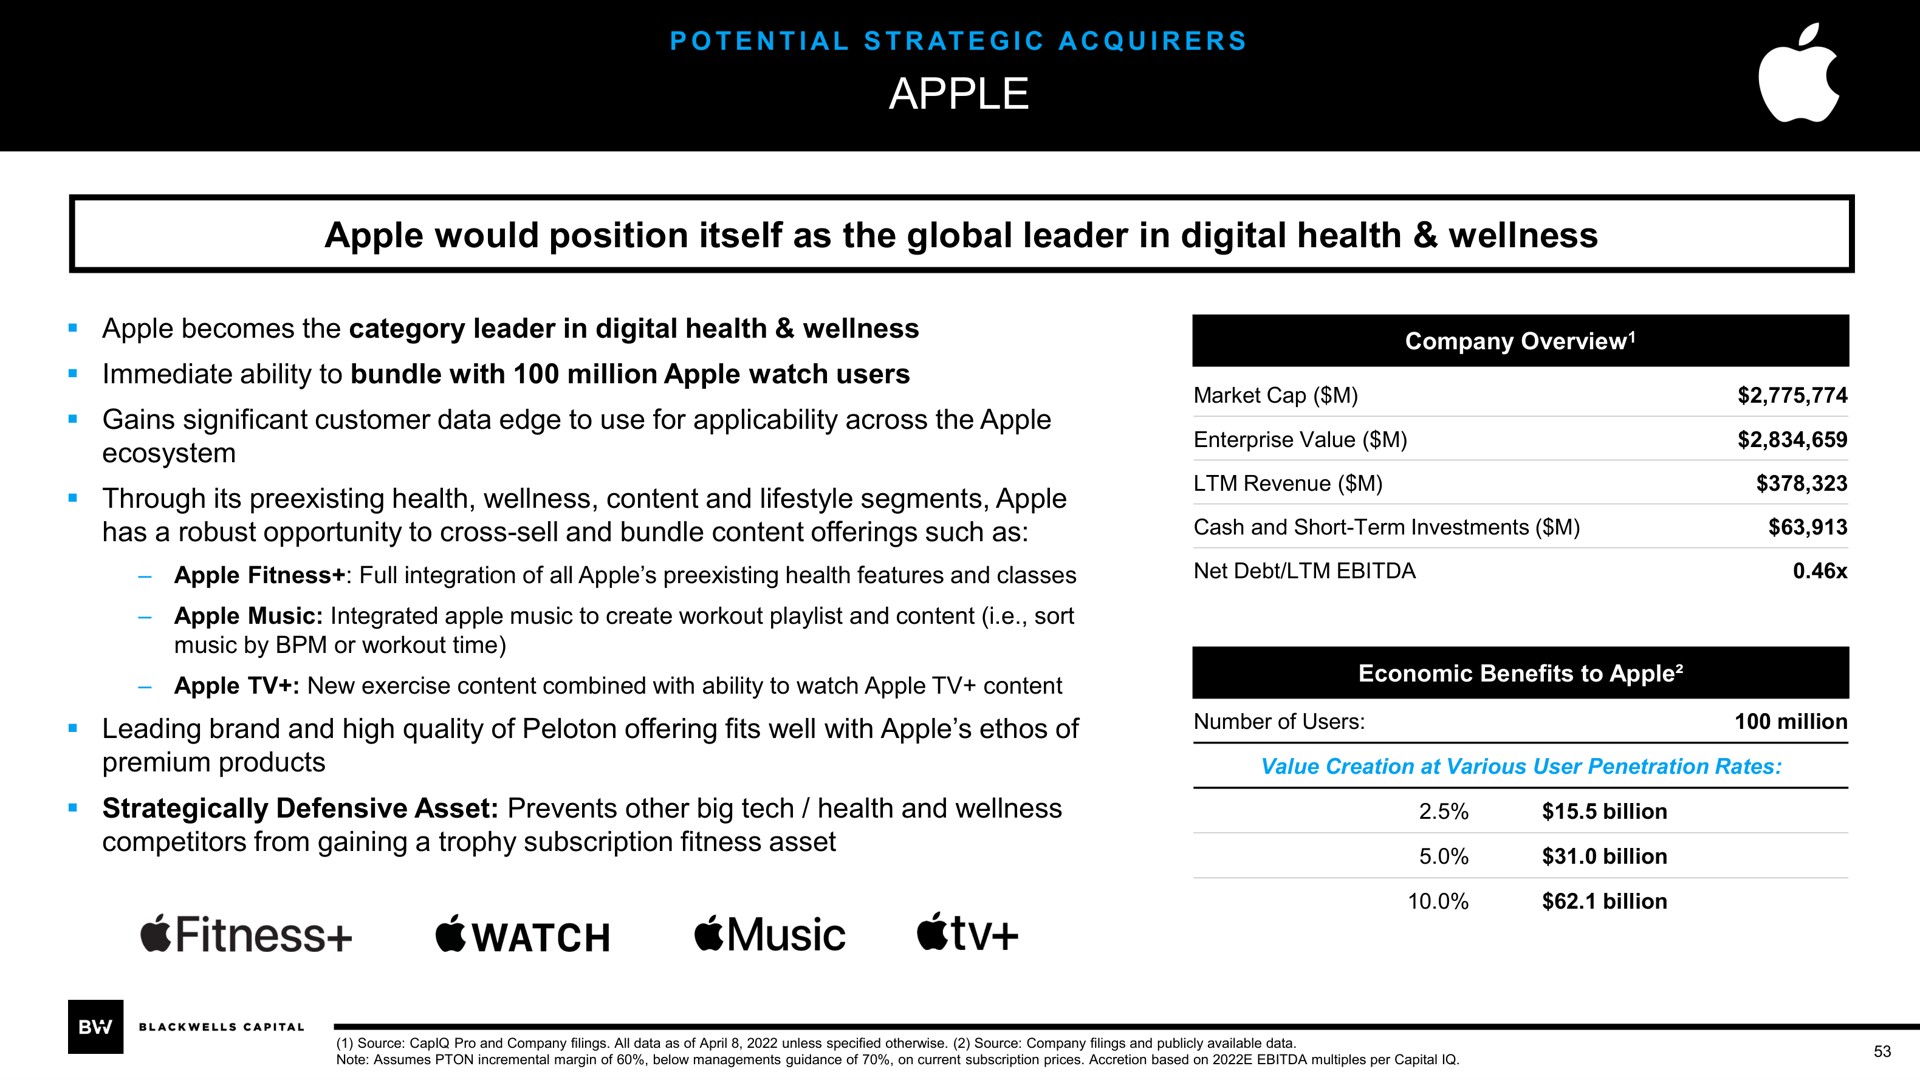 apple apple would position itself as the global leader in digital health wellness fitness watch music | Blackwells Capital